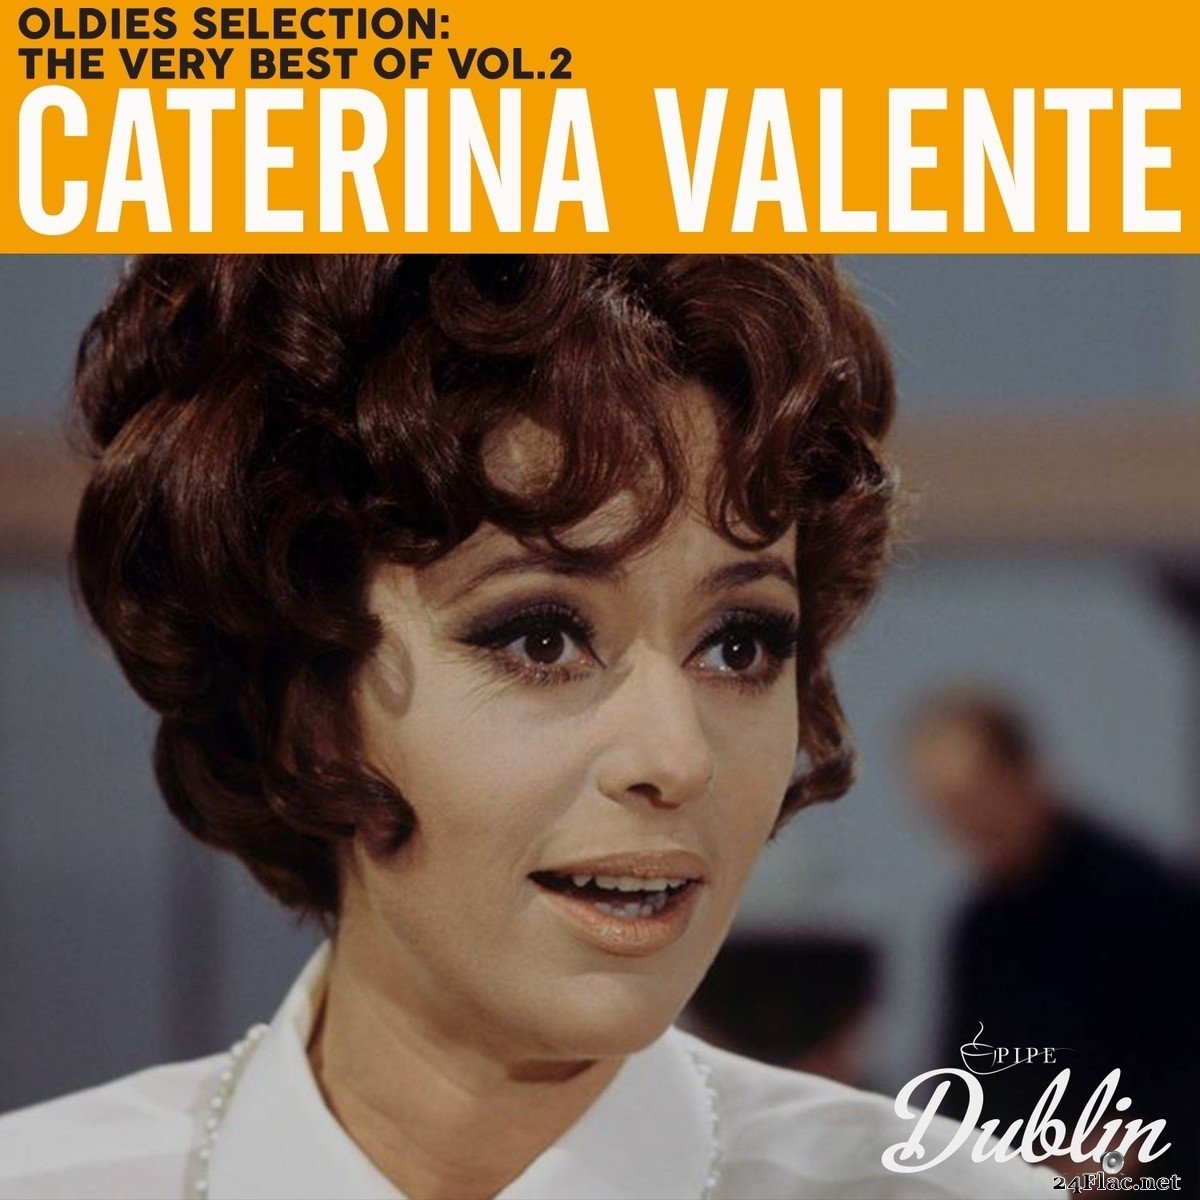 Caterina Valente - Oldies Selection: The Very Best of Vol.2 (2021) FLAC